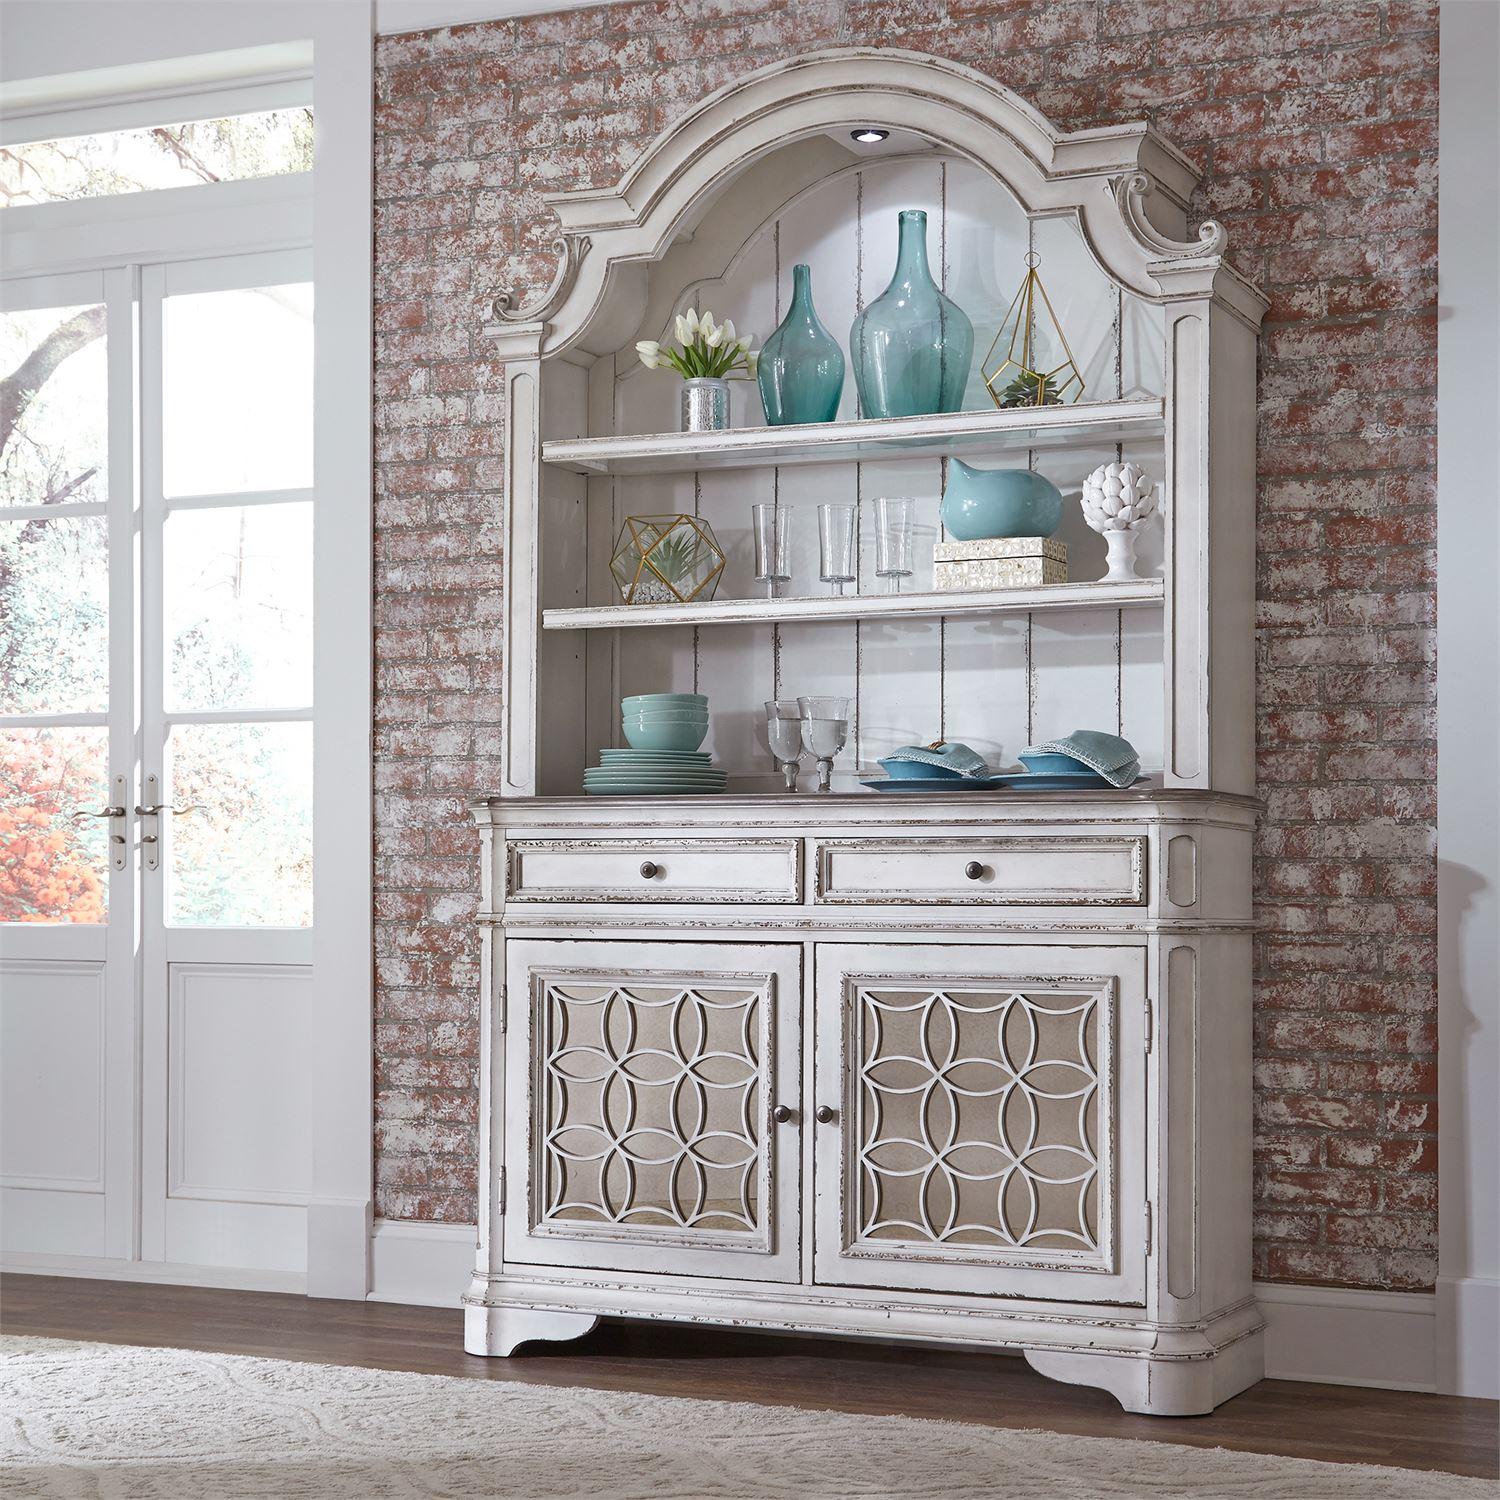 European Traditional Hutch & Buffet Magnolia Manor  (244-DR) Buffet 244-DR-HB in White 